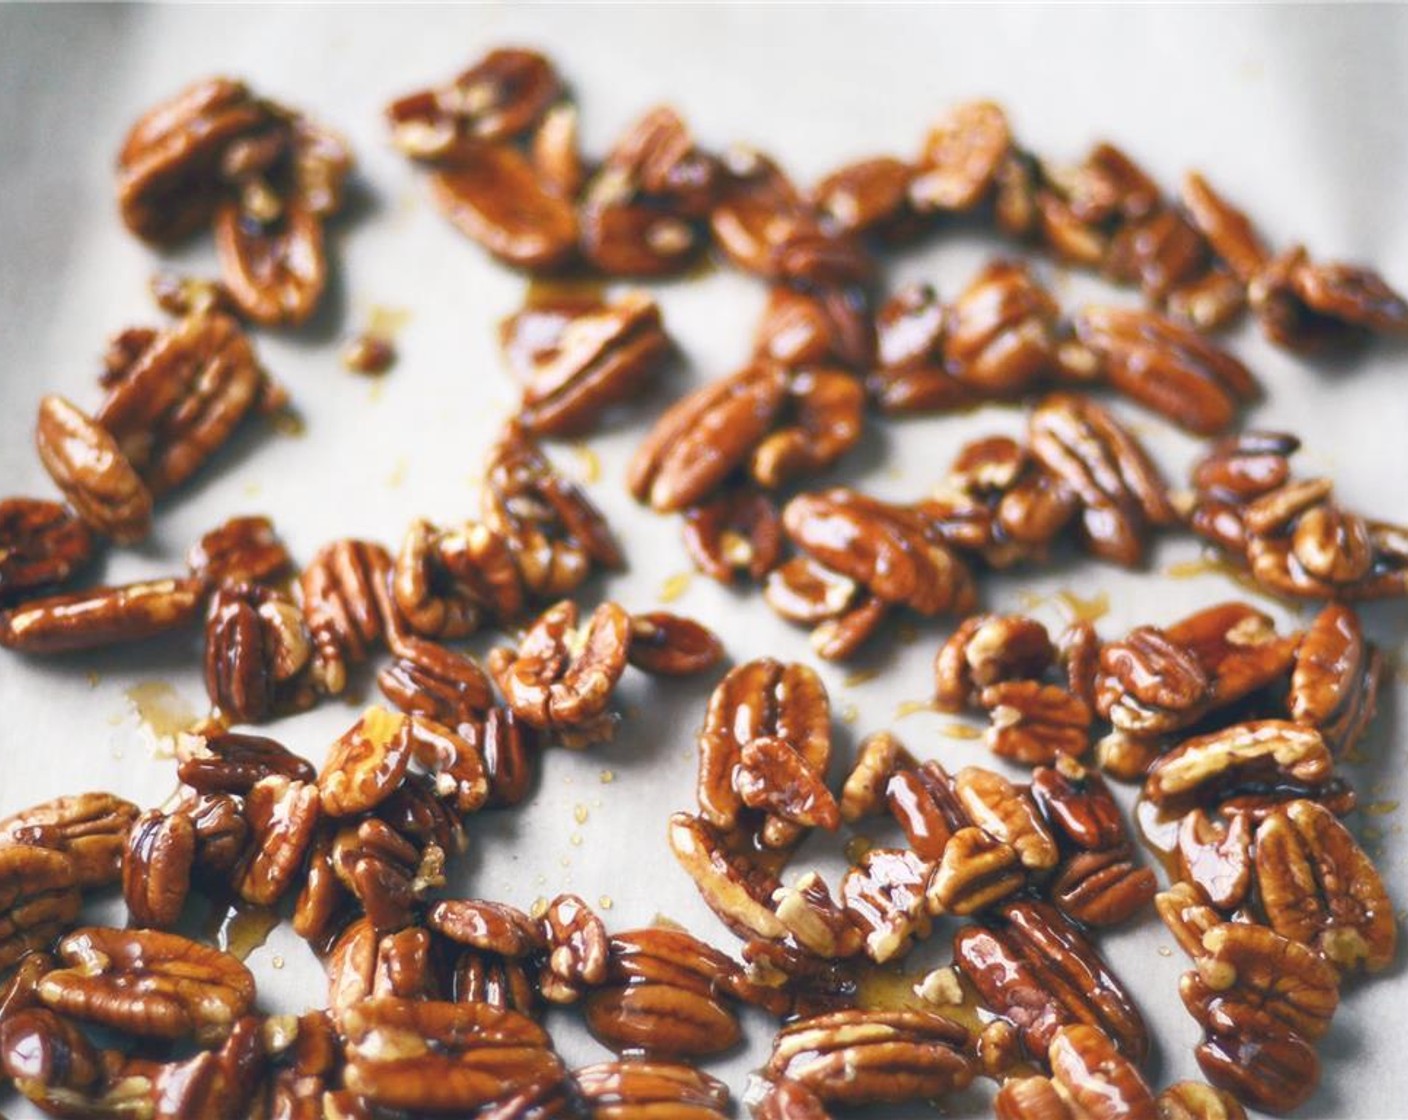 step 4 Pour pecans out onto prepared baking sheet, separating pecans with a fork until they are in a single layer. Place in preheated oven and bake for 6 minutes.